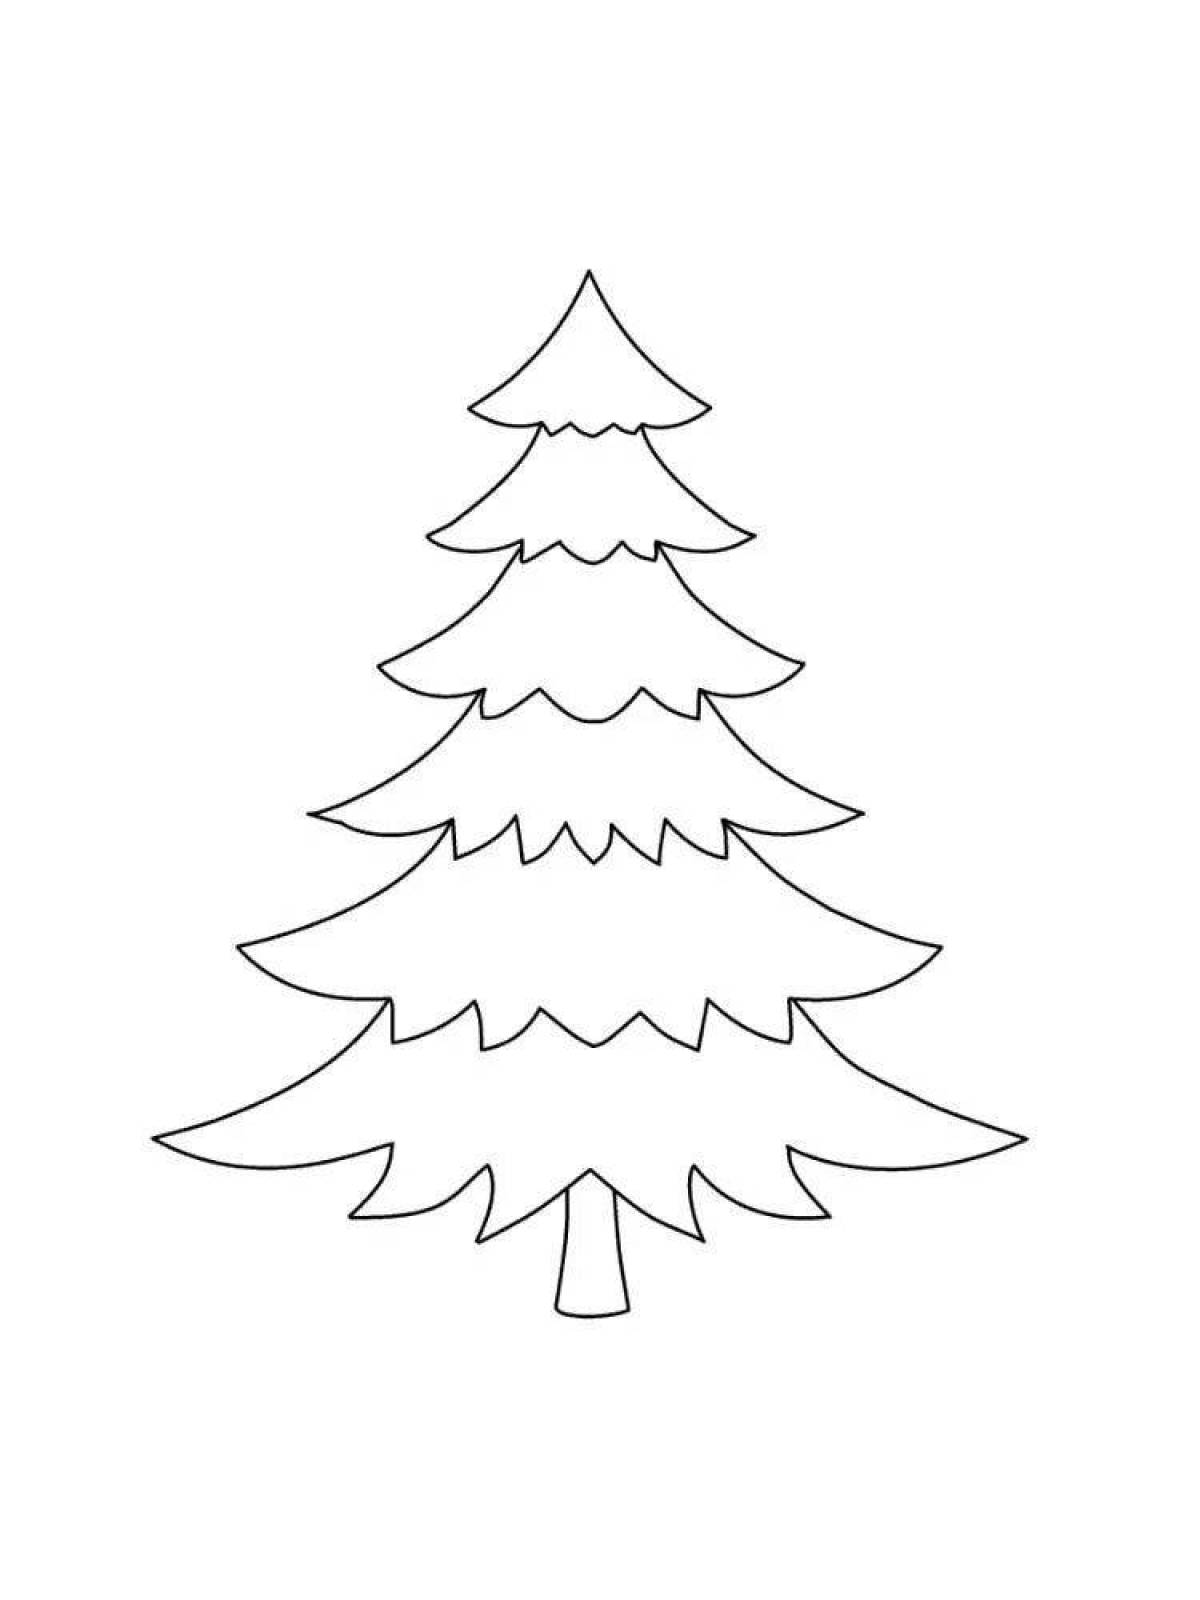 Exquisite Christmas tree pattern